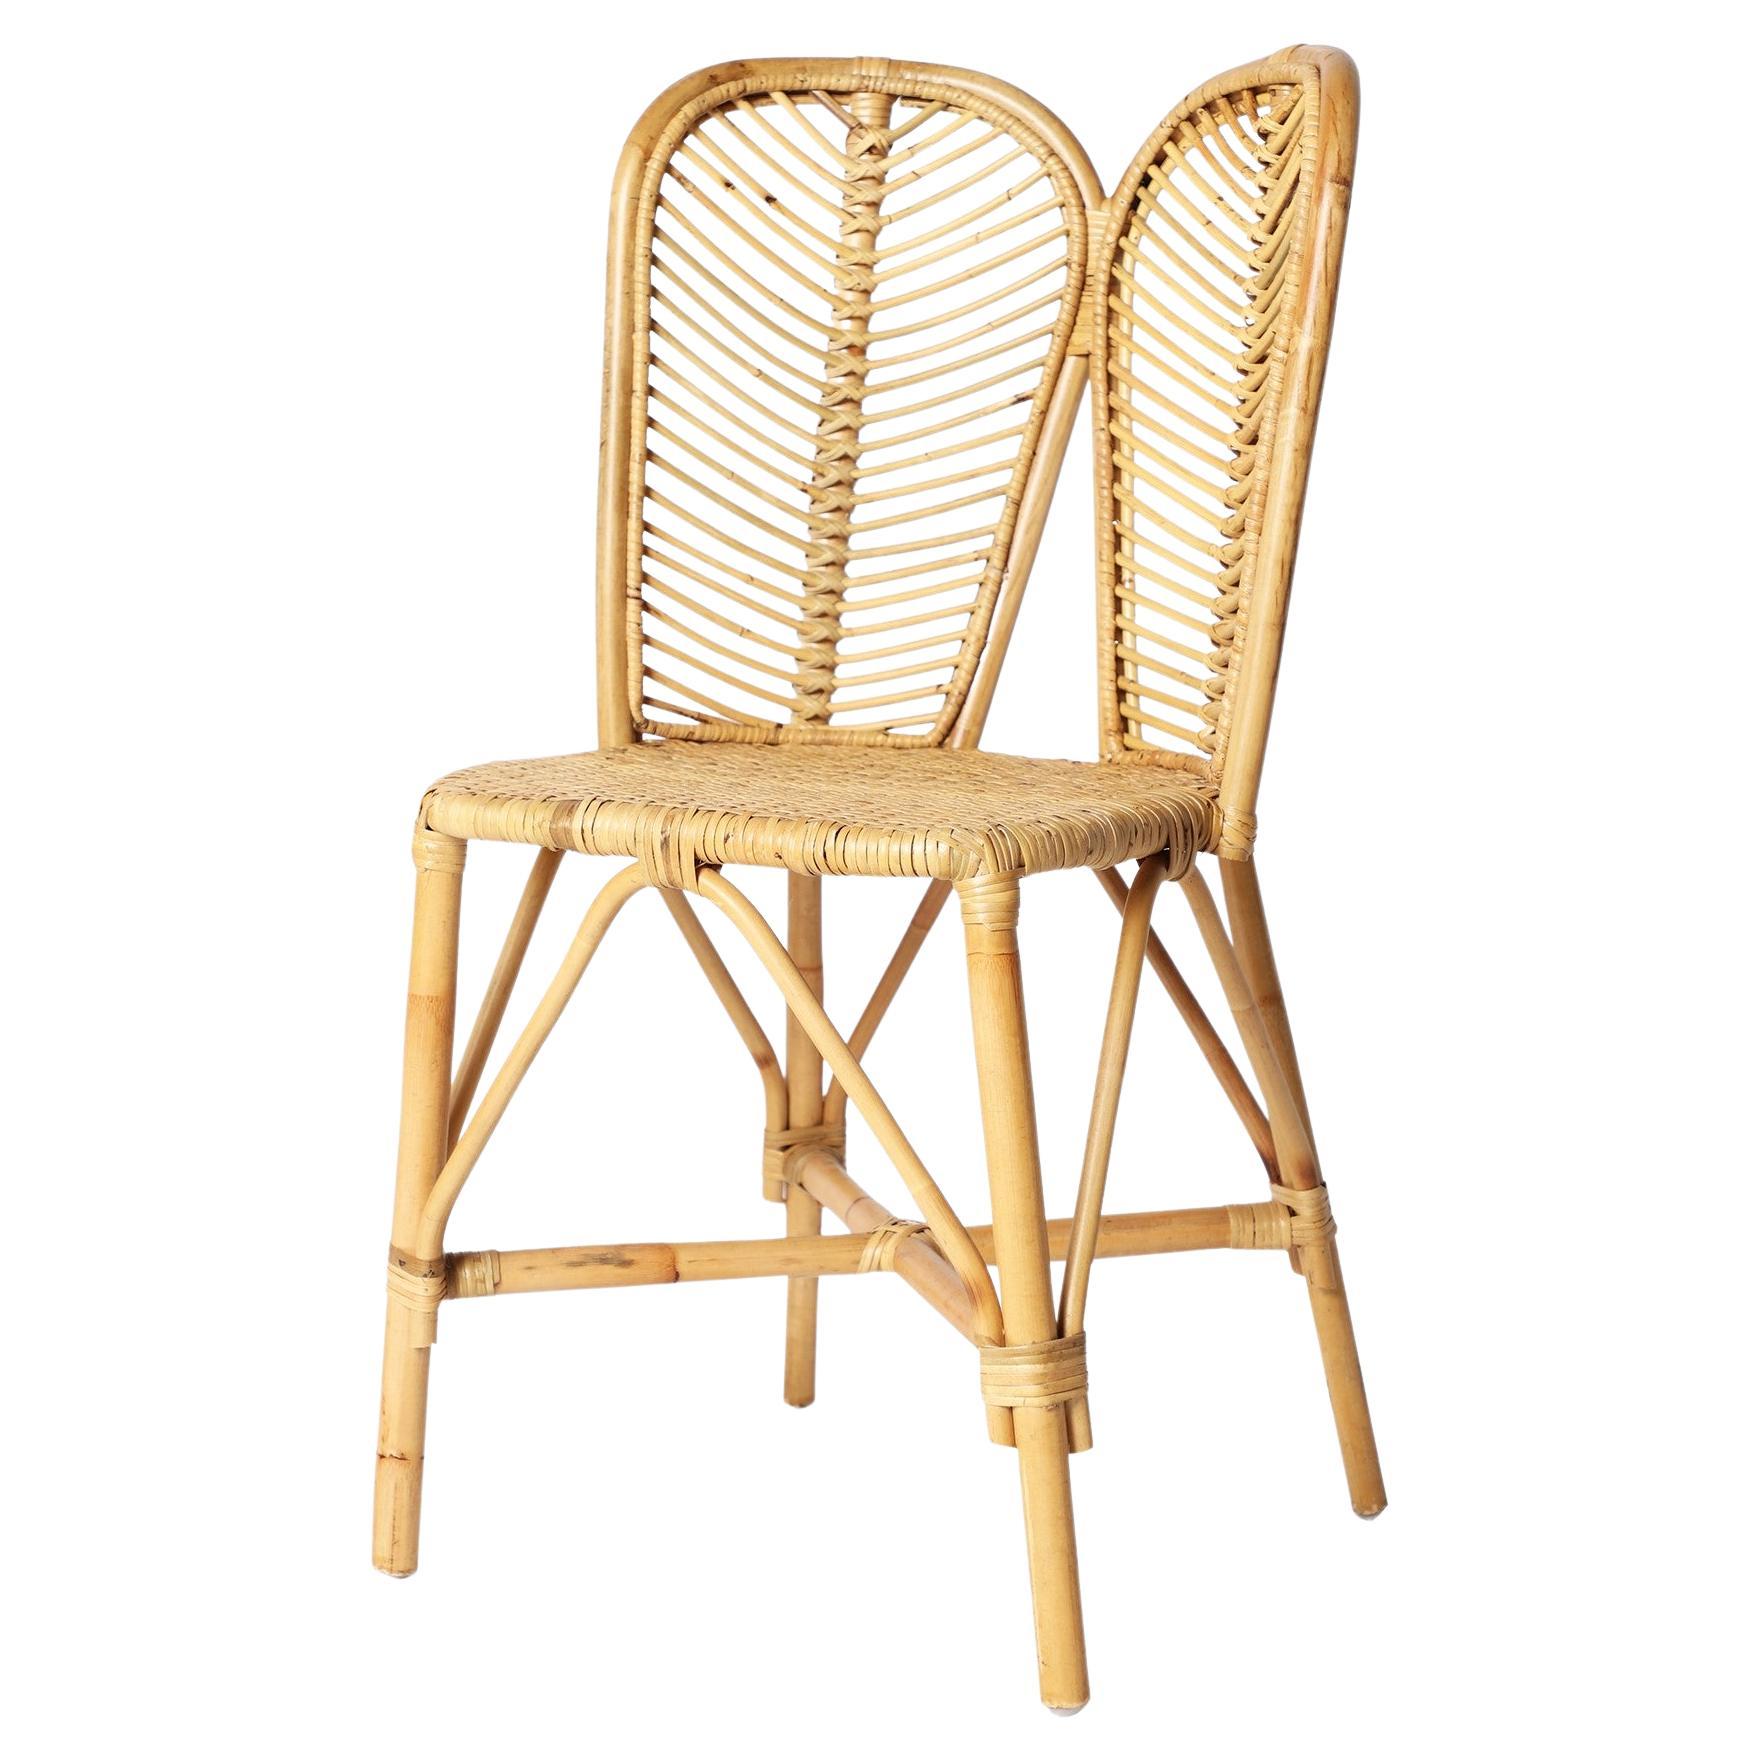 1960s Italian Design Style Handcrafted Rattan And Wicker Seat Chair For Sale